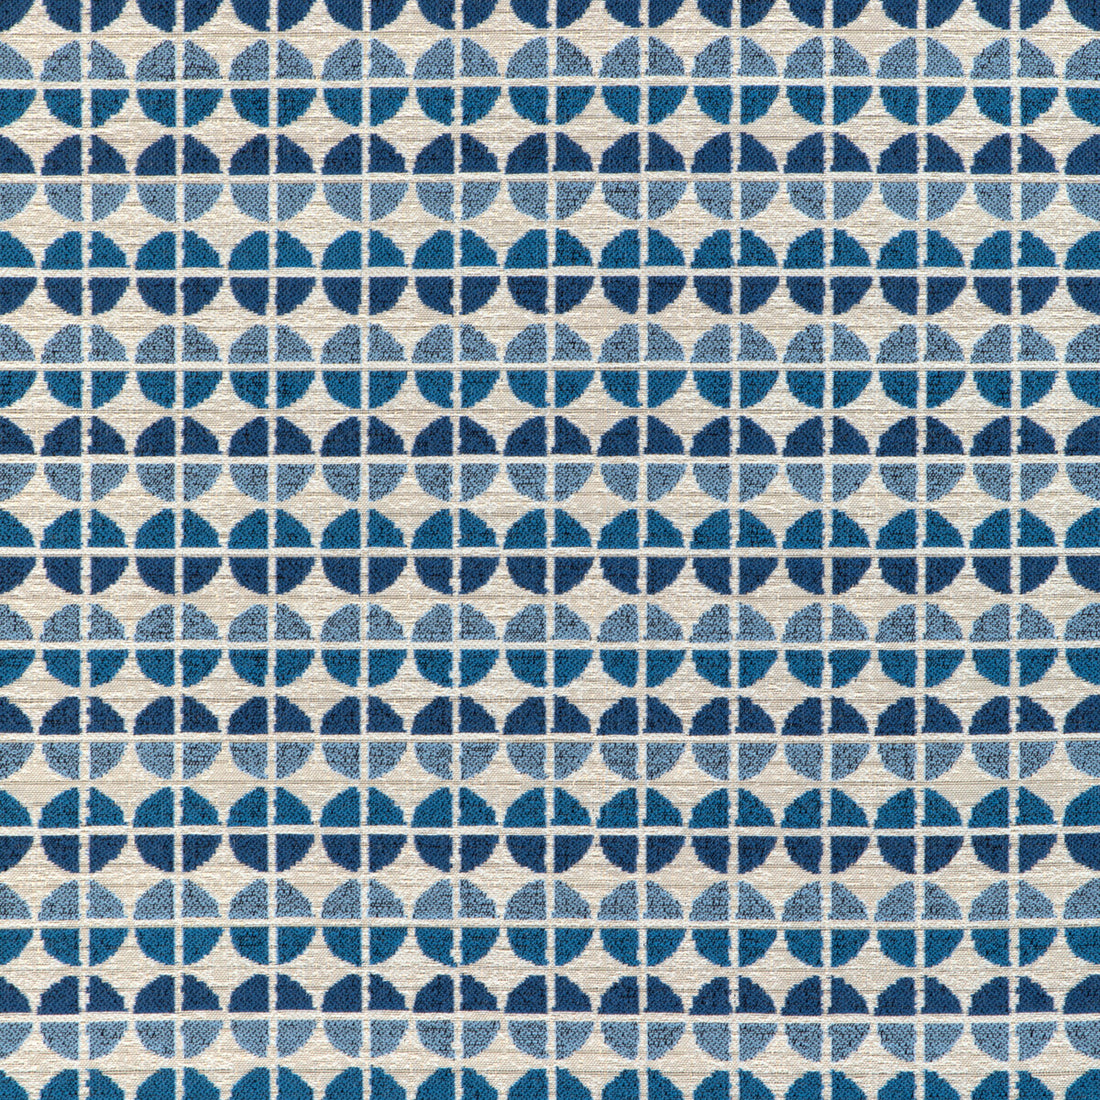 Decoy fabric in coastal color - pattern 37051.516.0 - by Kravet Contract in the Chesapeake collection